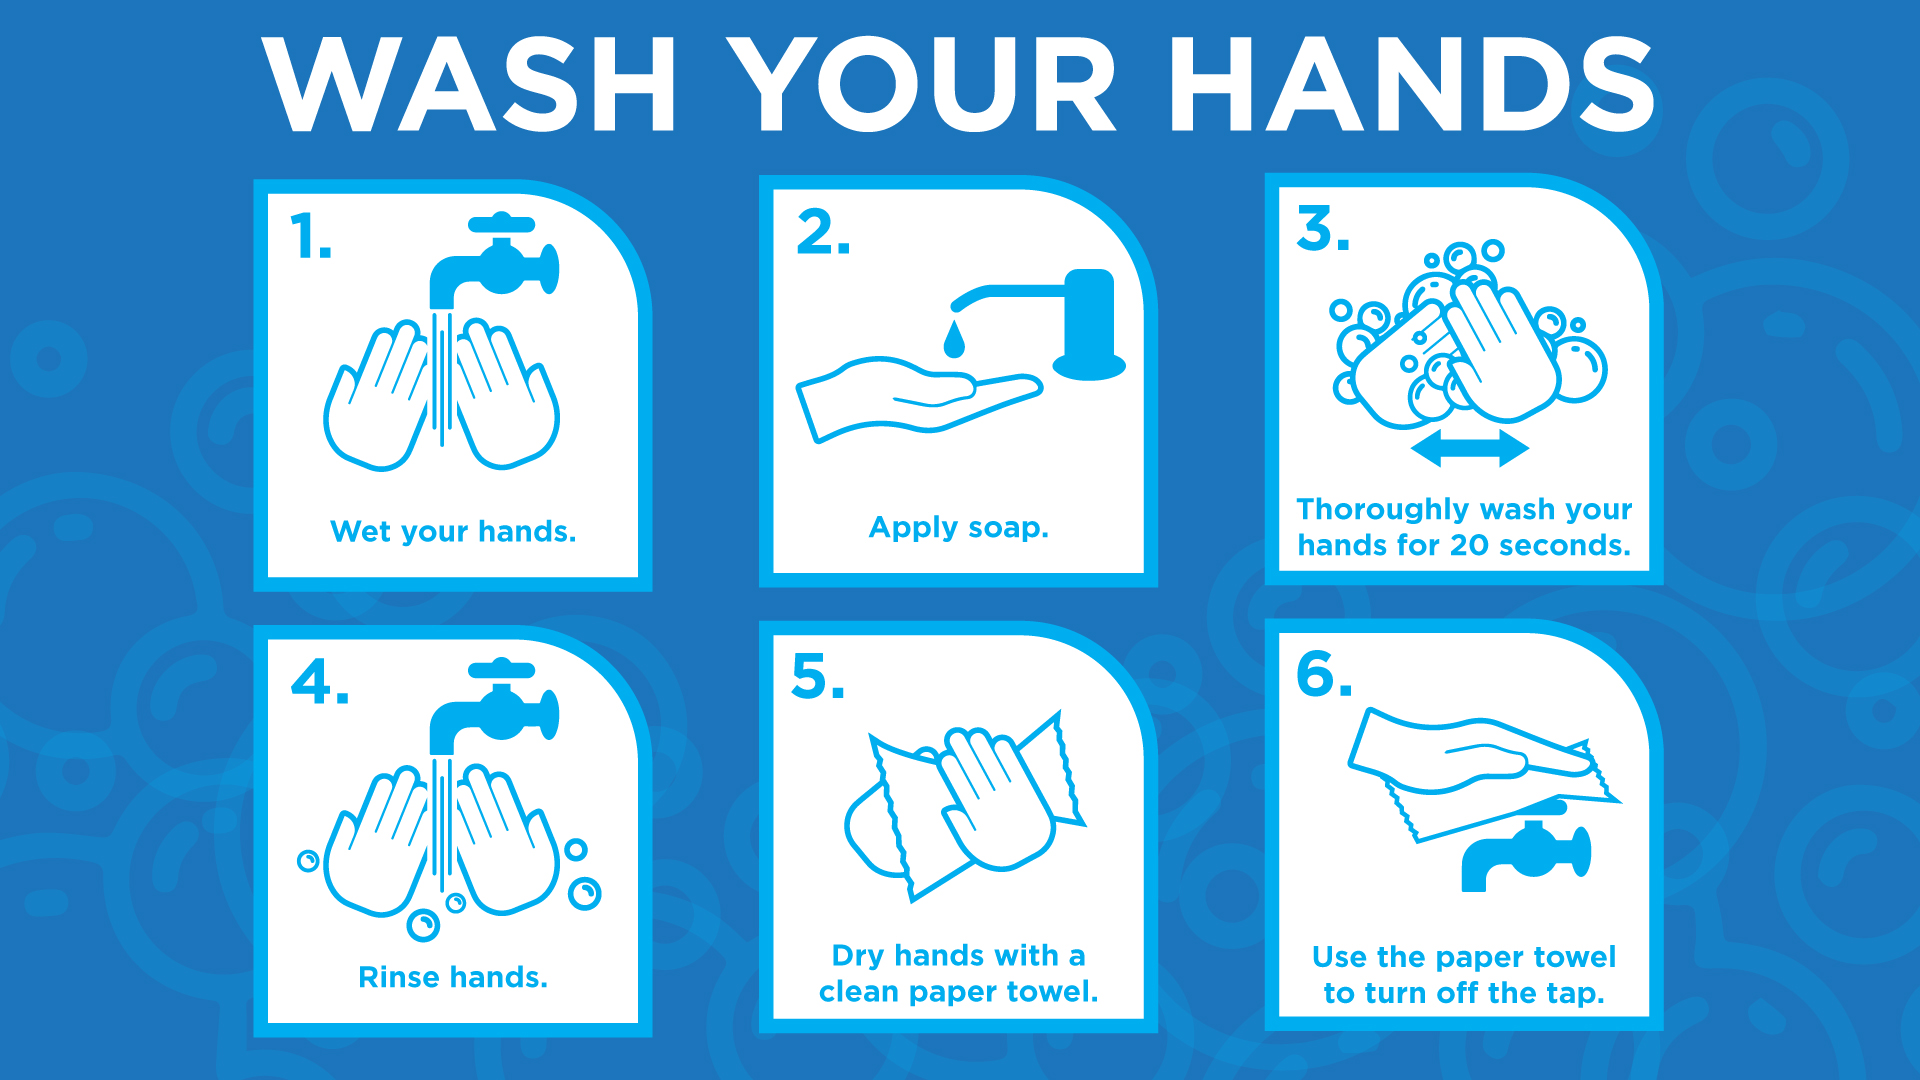 Wash Hands Poster 24”x 12”,  - 4 pack